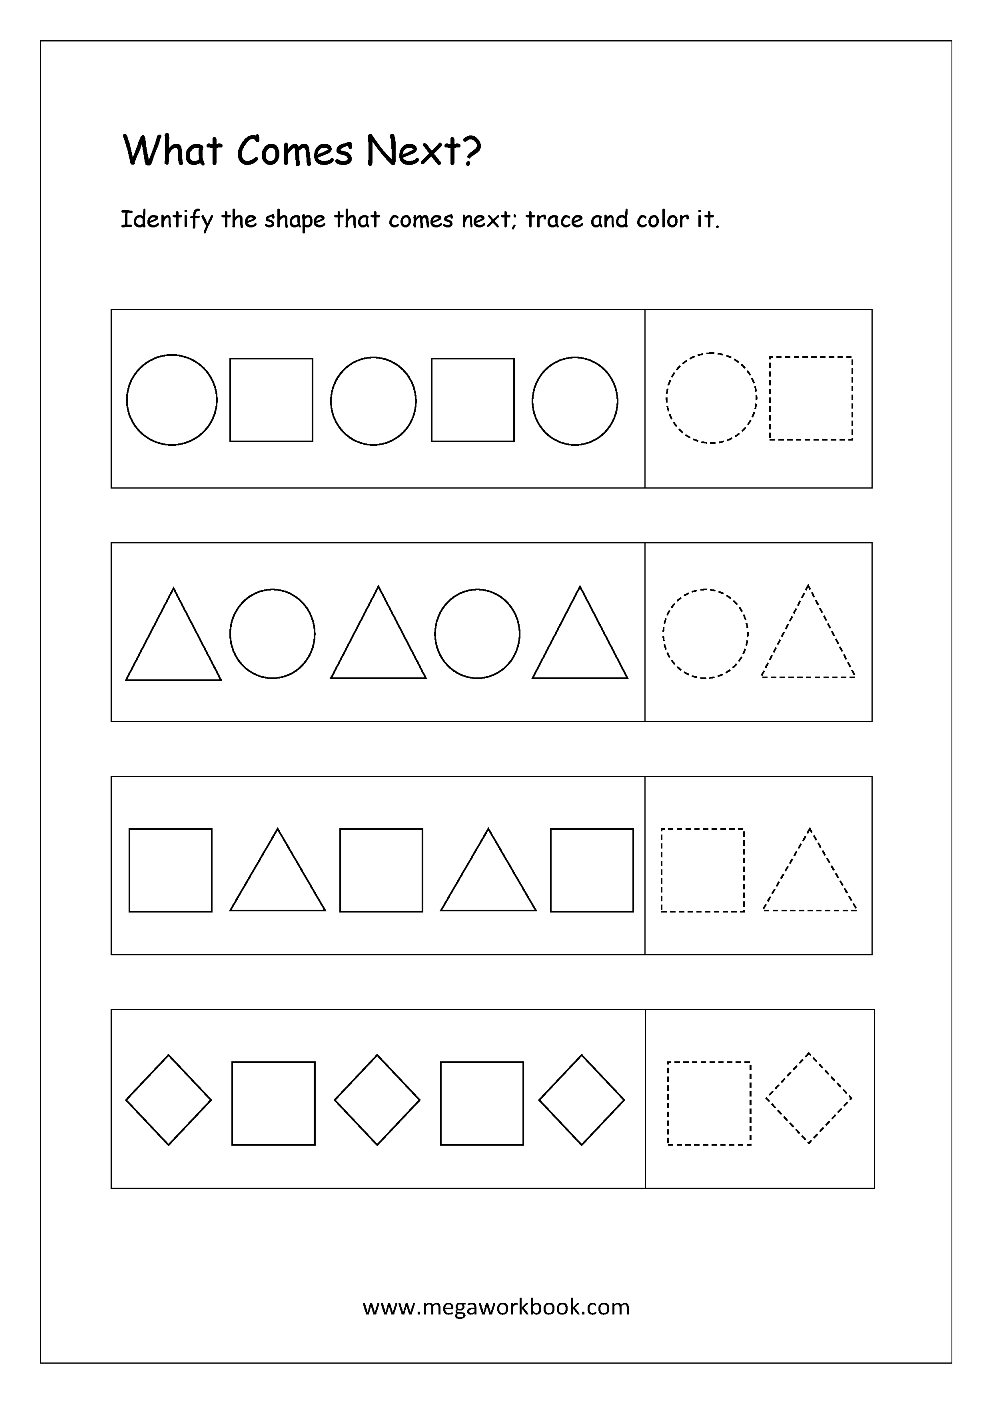 Free Printable Colors Shapes And Pattern Worksheets For Preschool As Well As Pattern Worksheets For Preschool